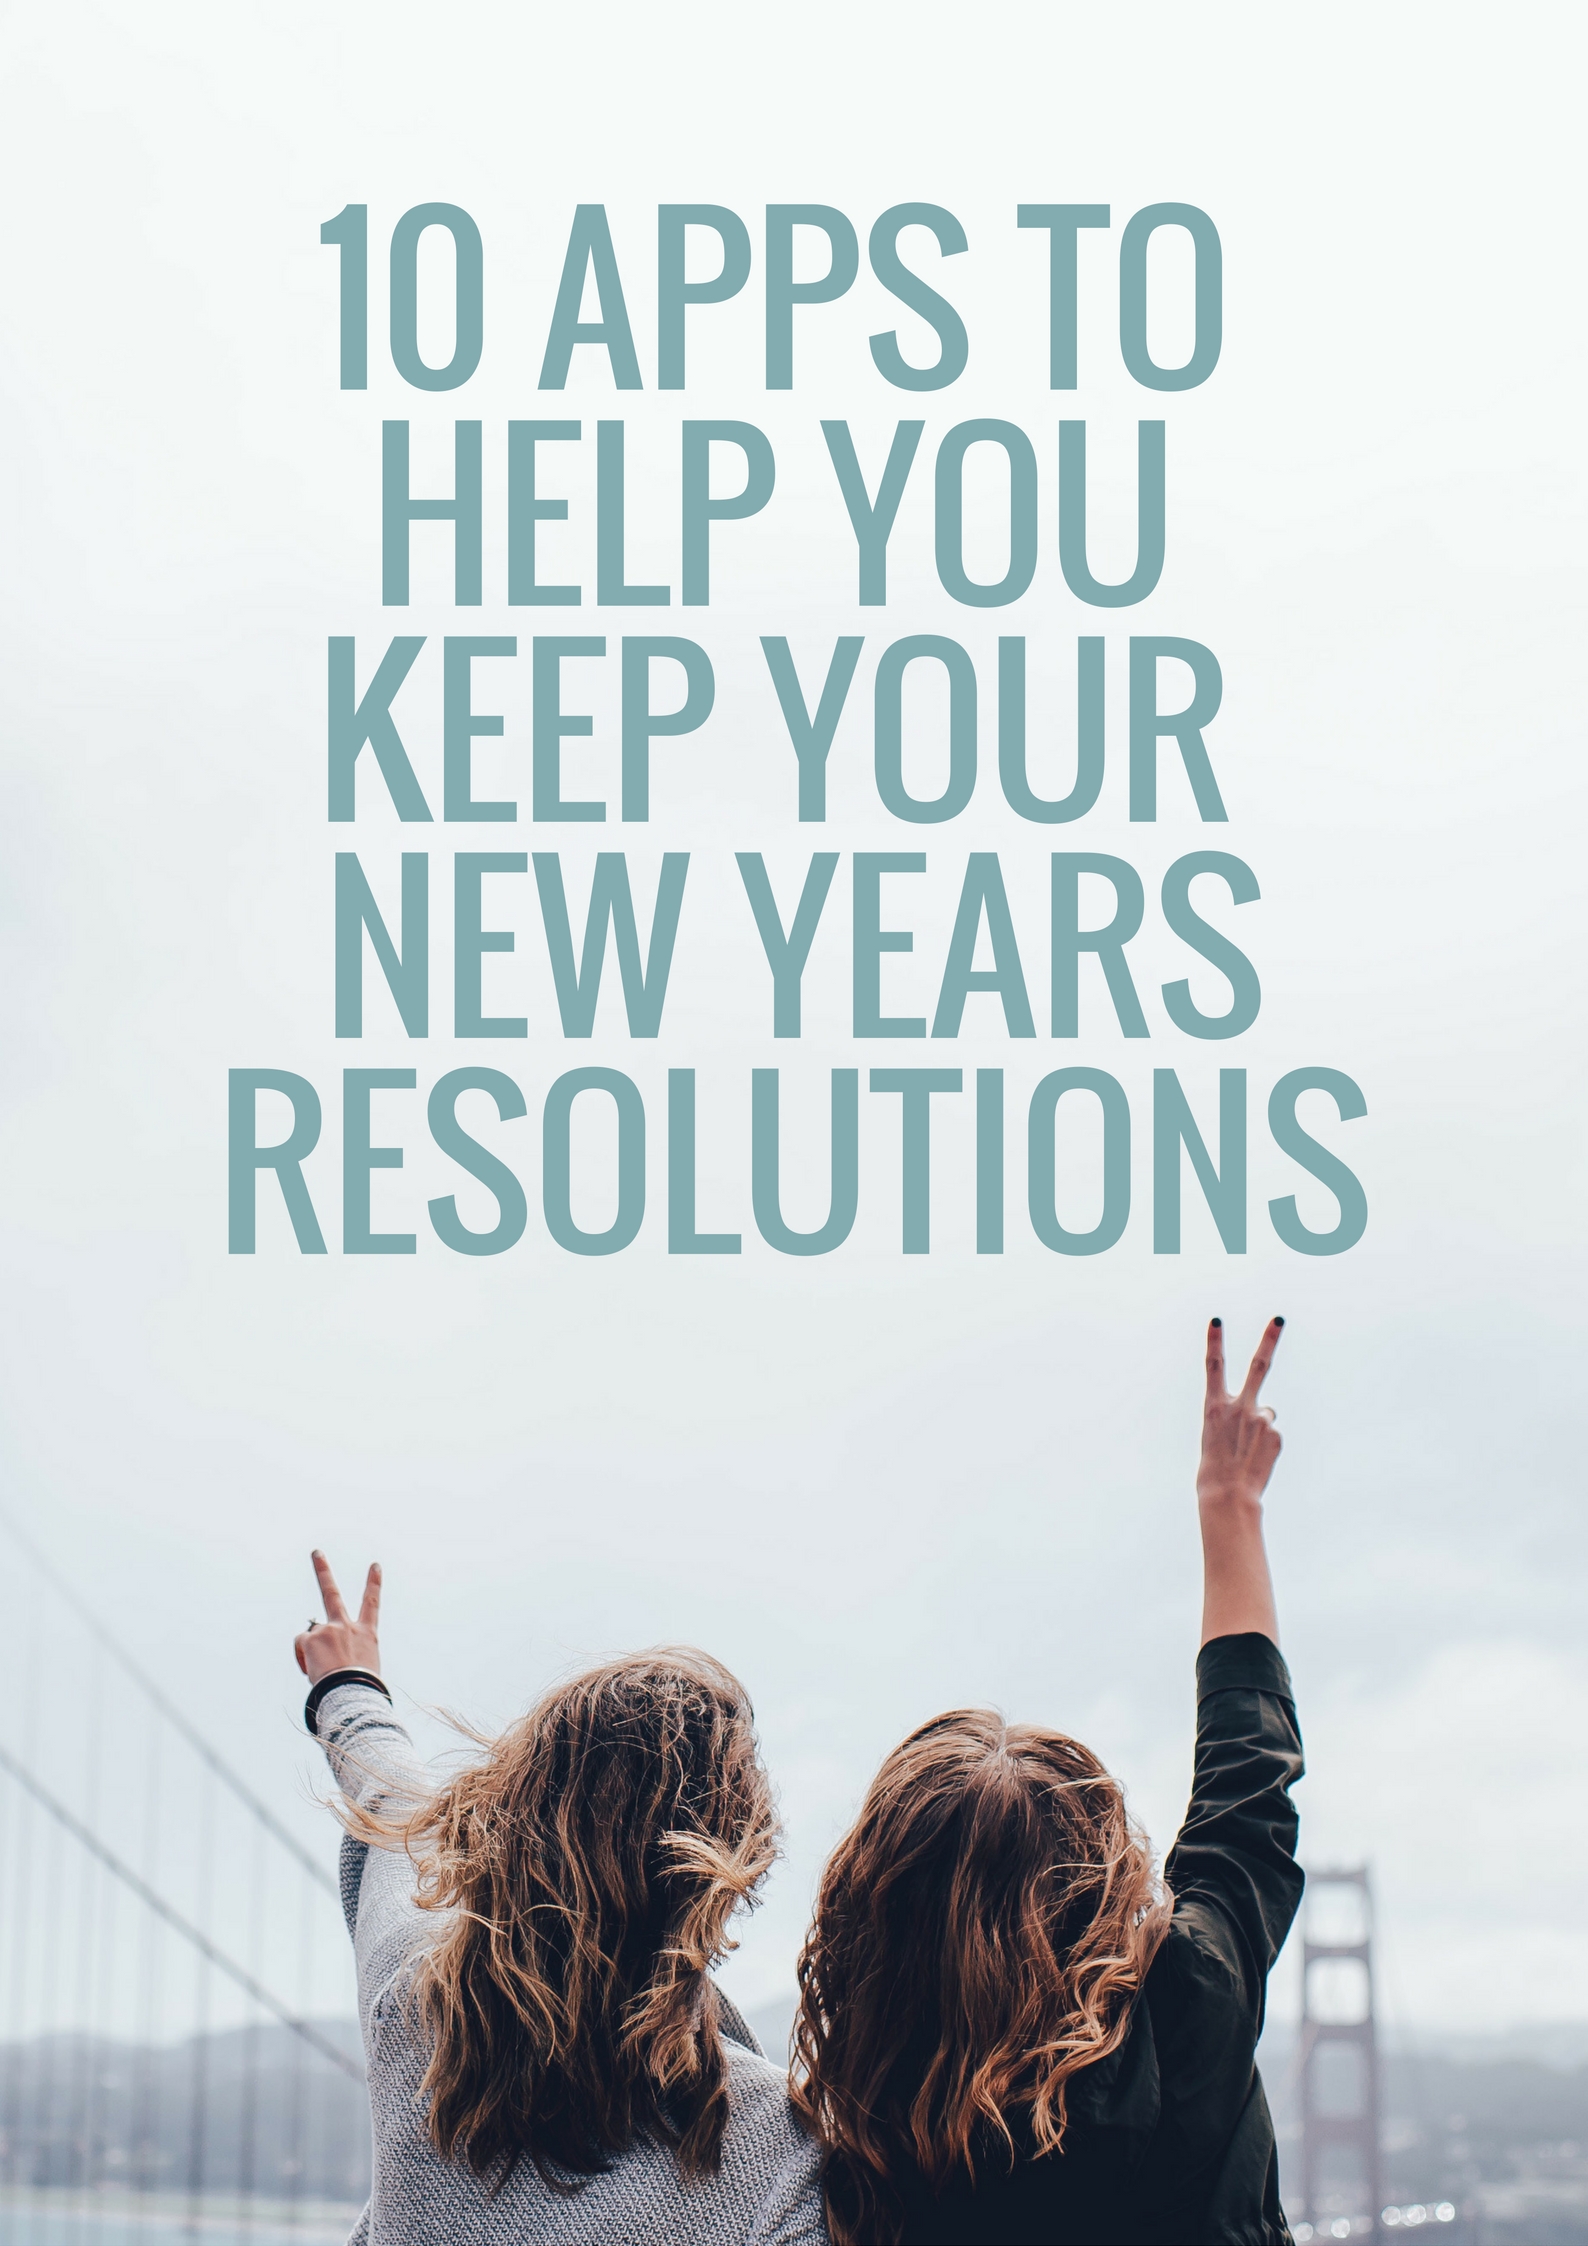 Apps to Help You Keep Your New Years Resolutions